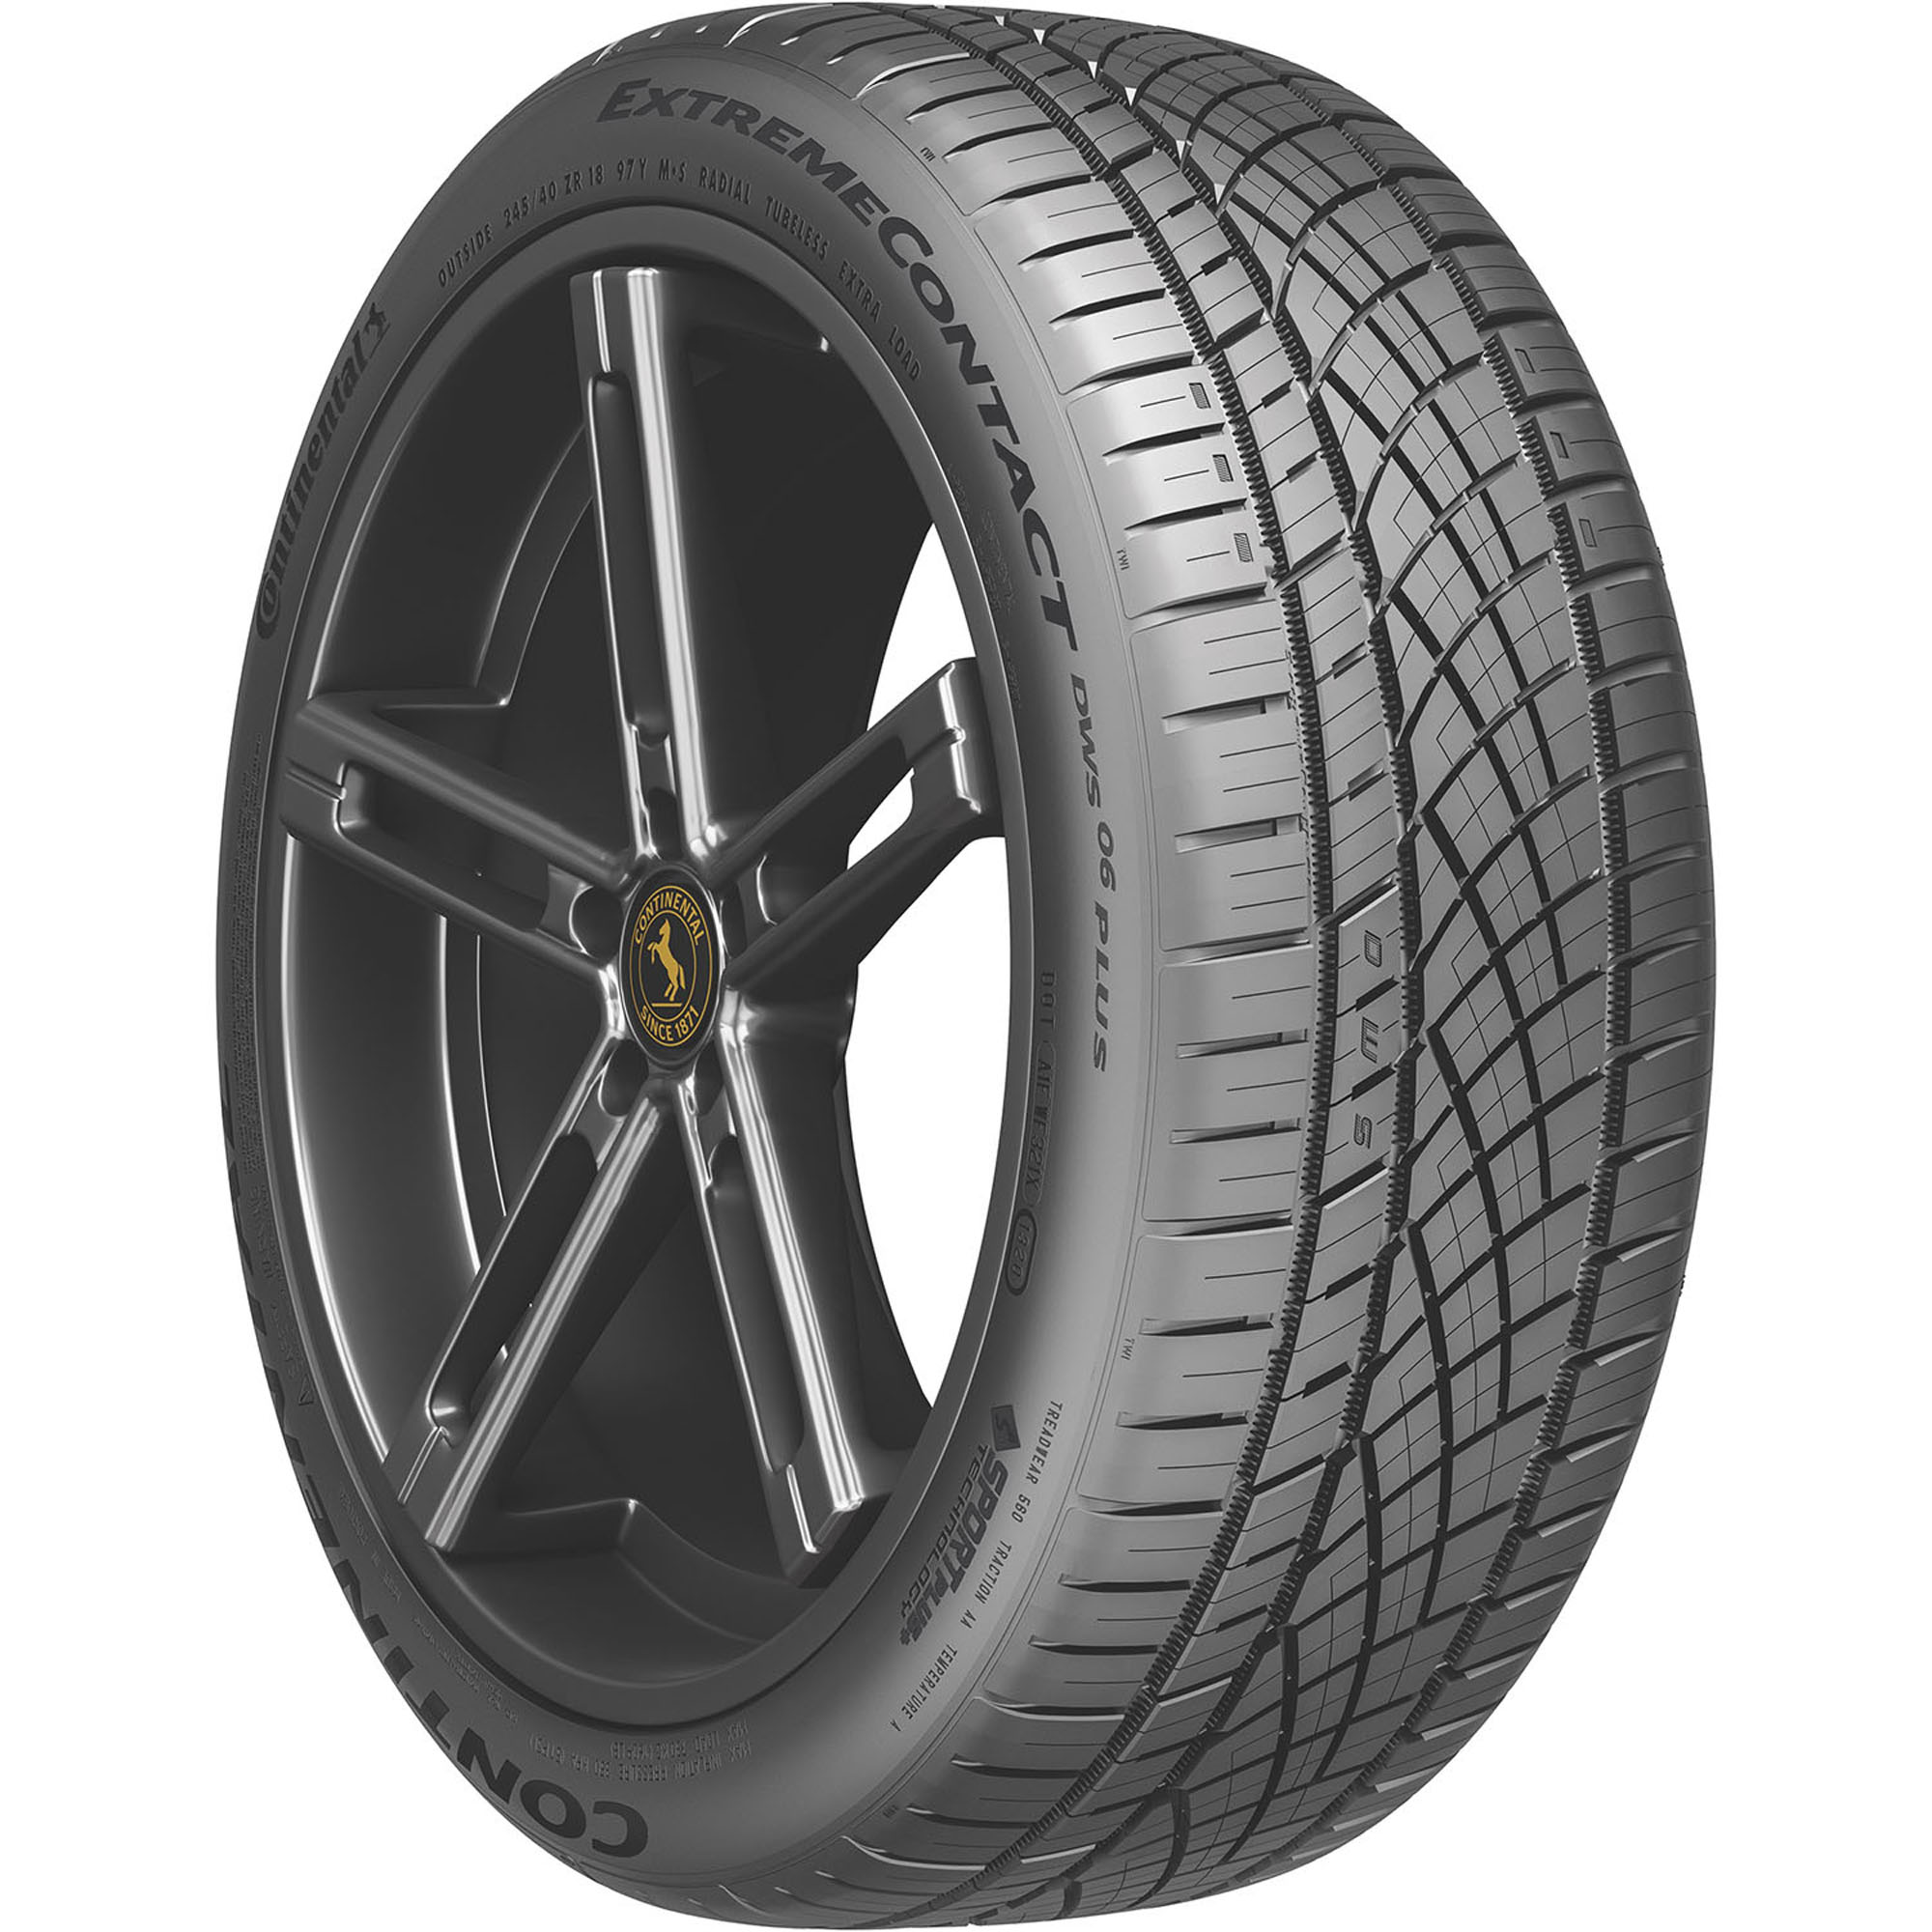 Continental ExtremeContact DWS06 PLUS All Season 225/50ZR18 95W Passenger  Tire